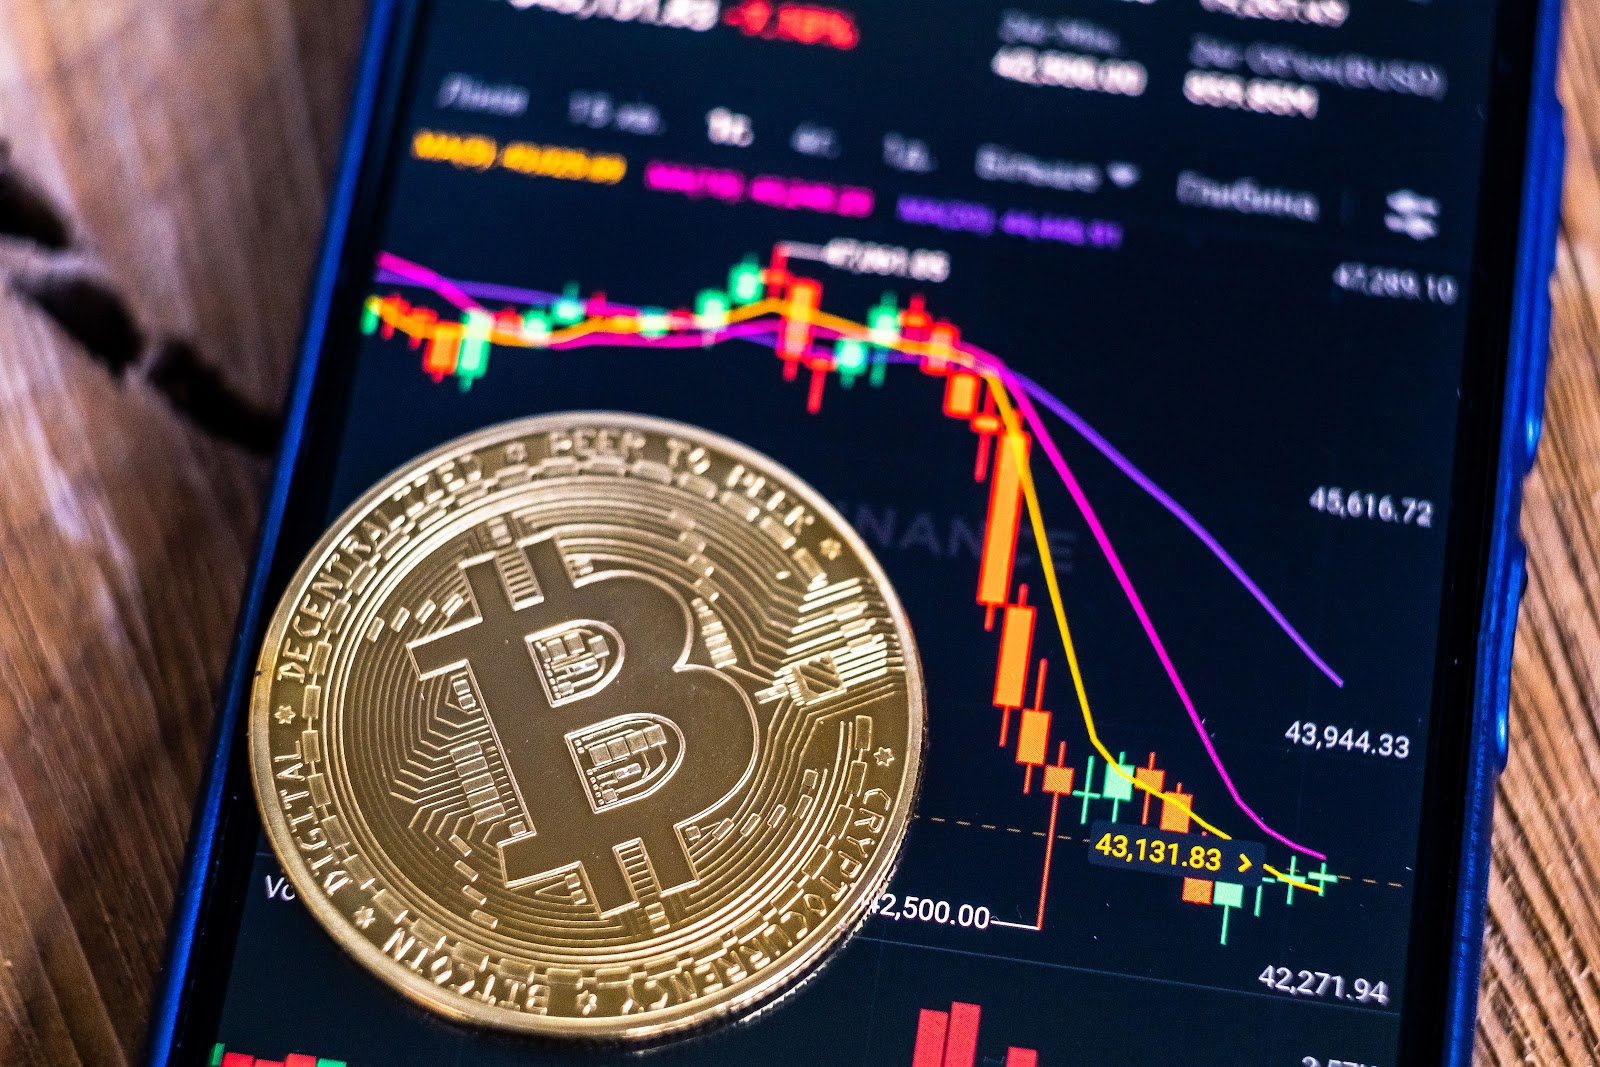 Bitcoin Falls To January 2021 Highs After 5% Drop, But Bitcoin Minetrix Continues Rising After Raising $6.2 Million - Here’s Why